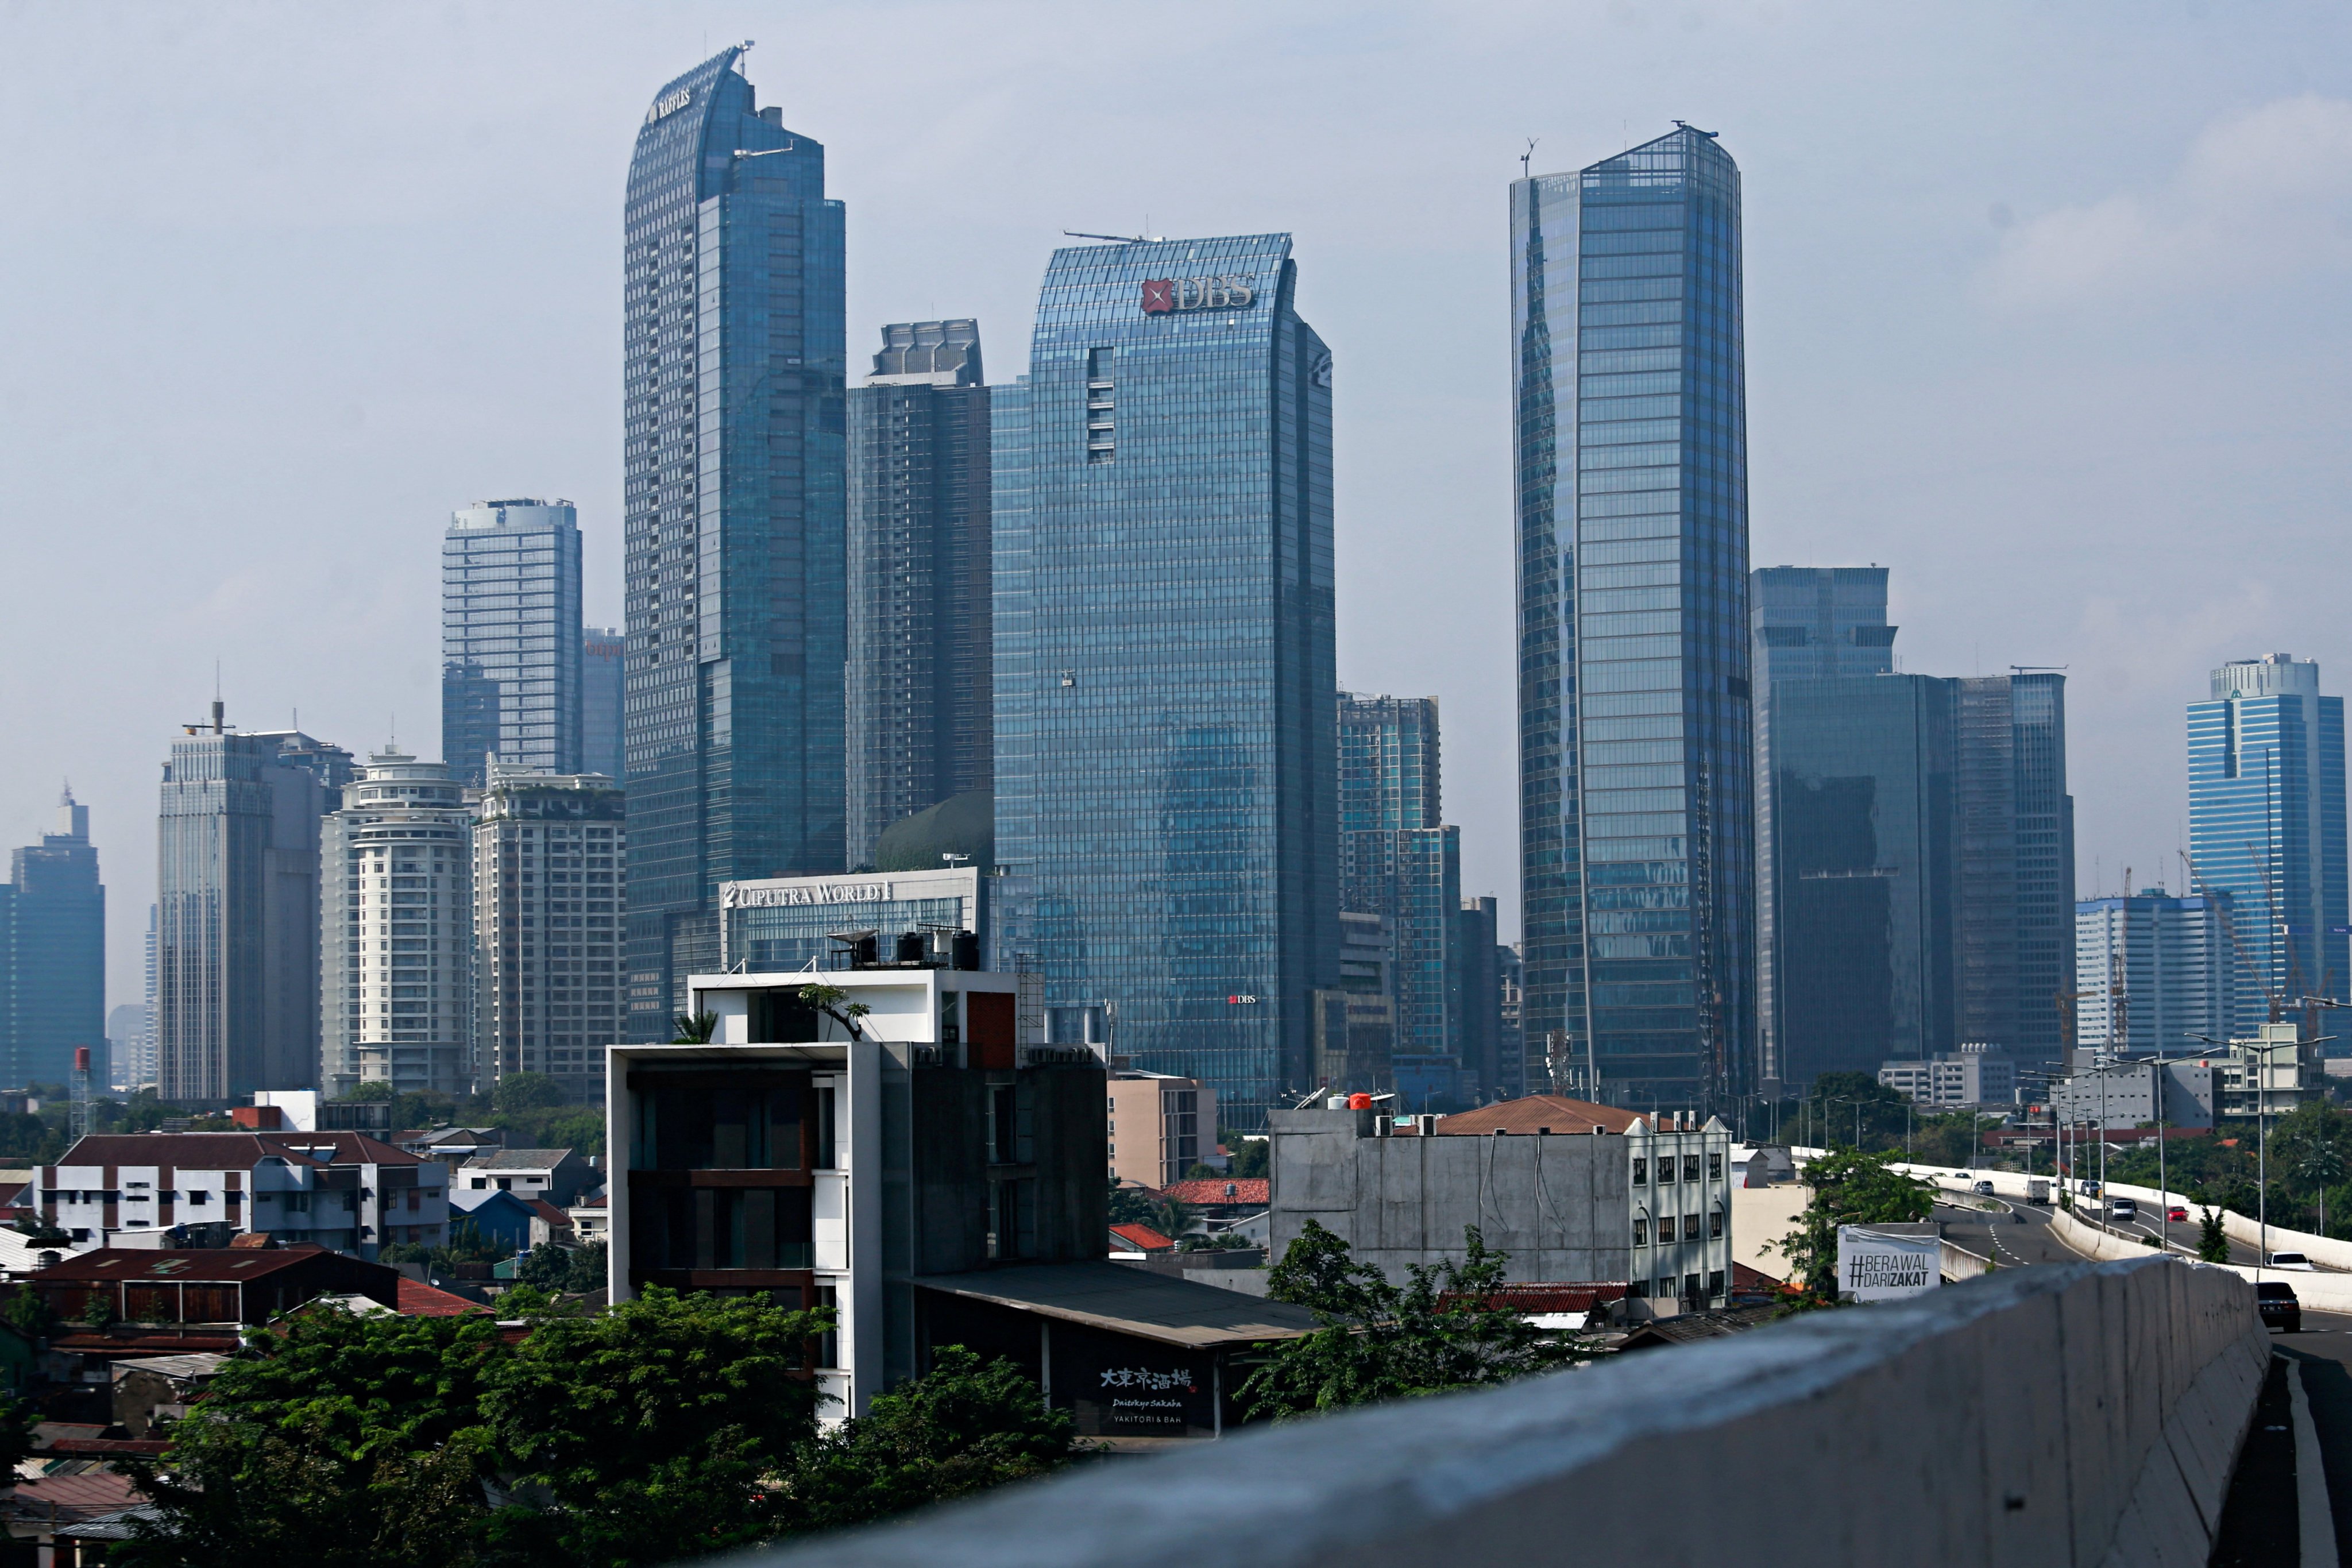 Indonesia says it aims to become a major semiconductor player in Southeast Asia. Photo: Reuters